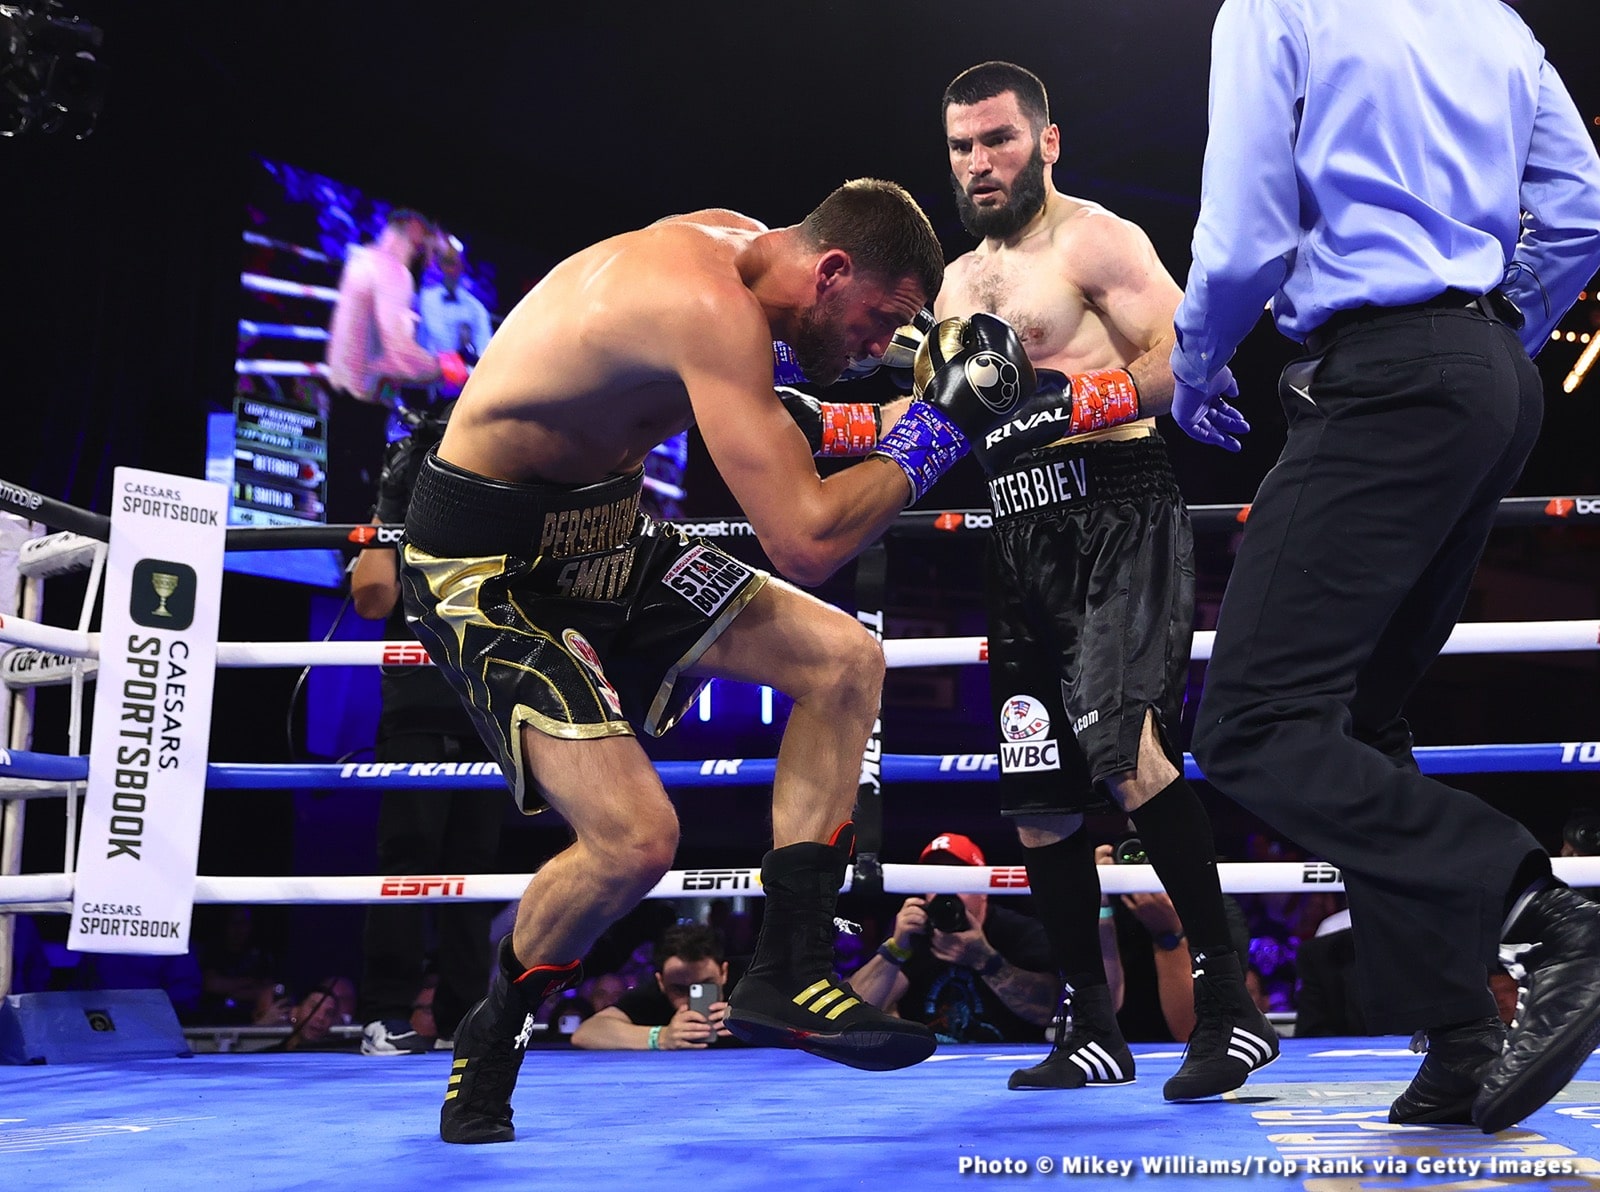 Artur Beterbiev may need to wait on Bivol after he faces Canelo in September